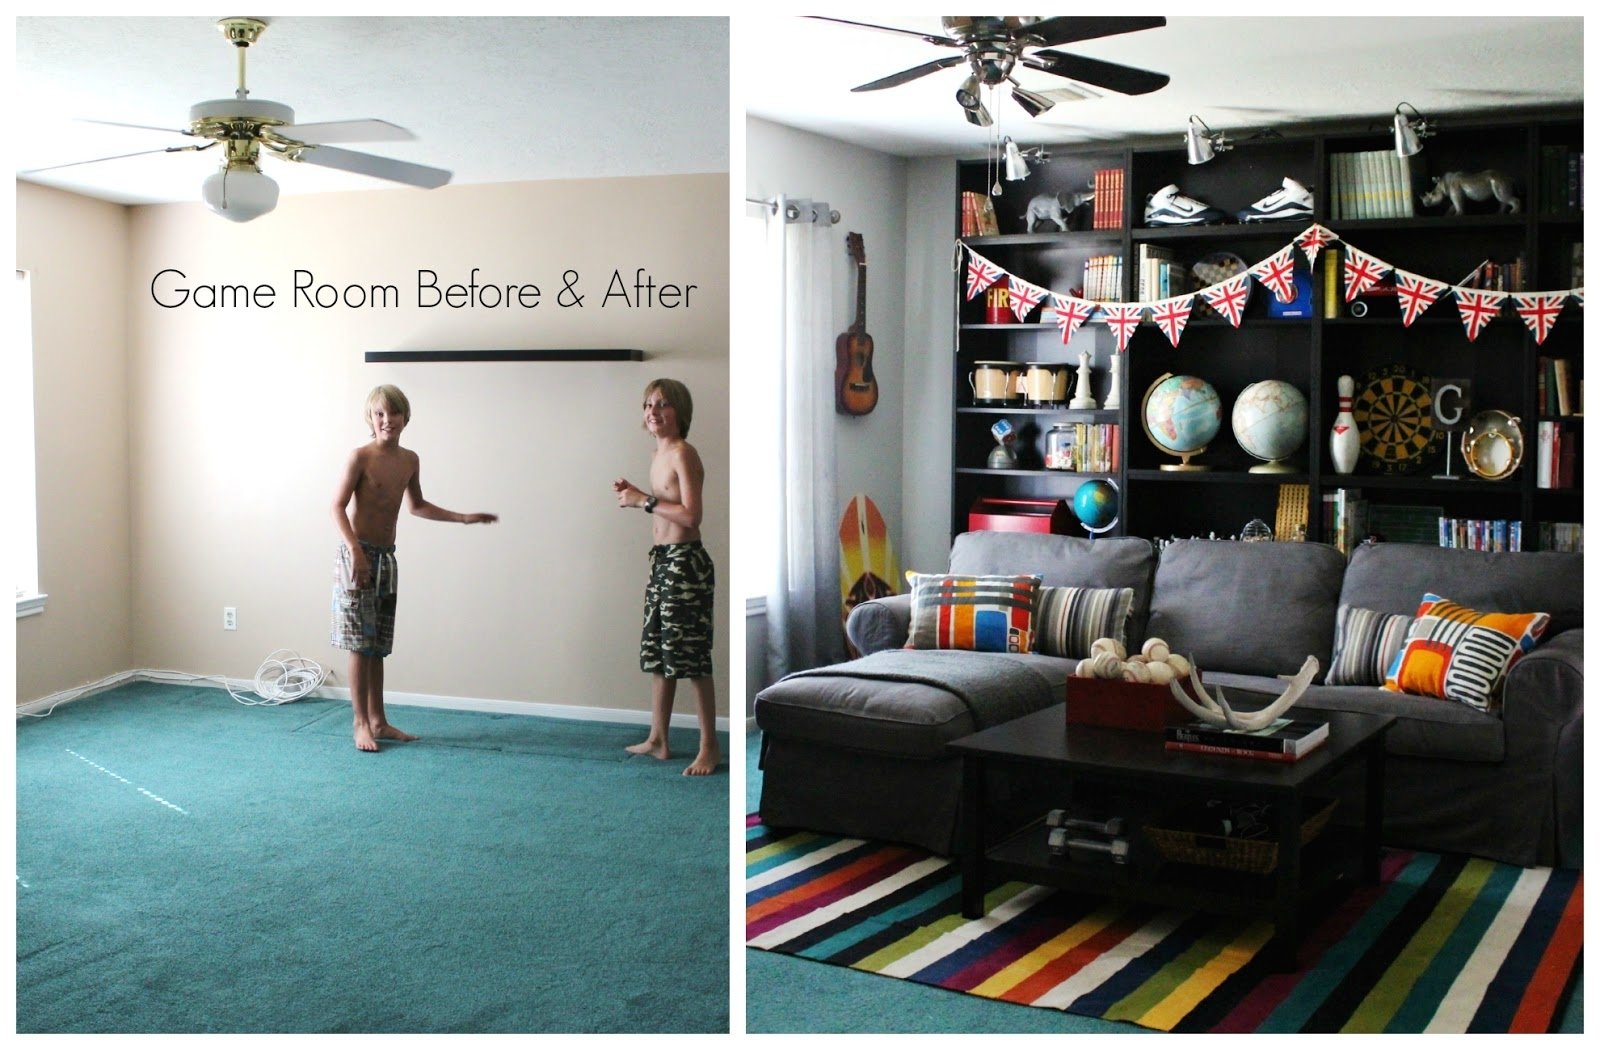 10 Gorgeous Game Room Ideas For Kids kids game room ideas rooms for and f home design pictures fun 2023